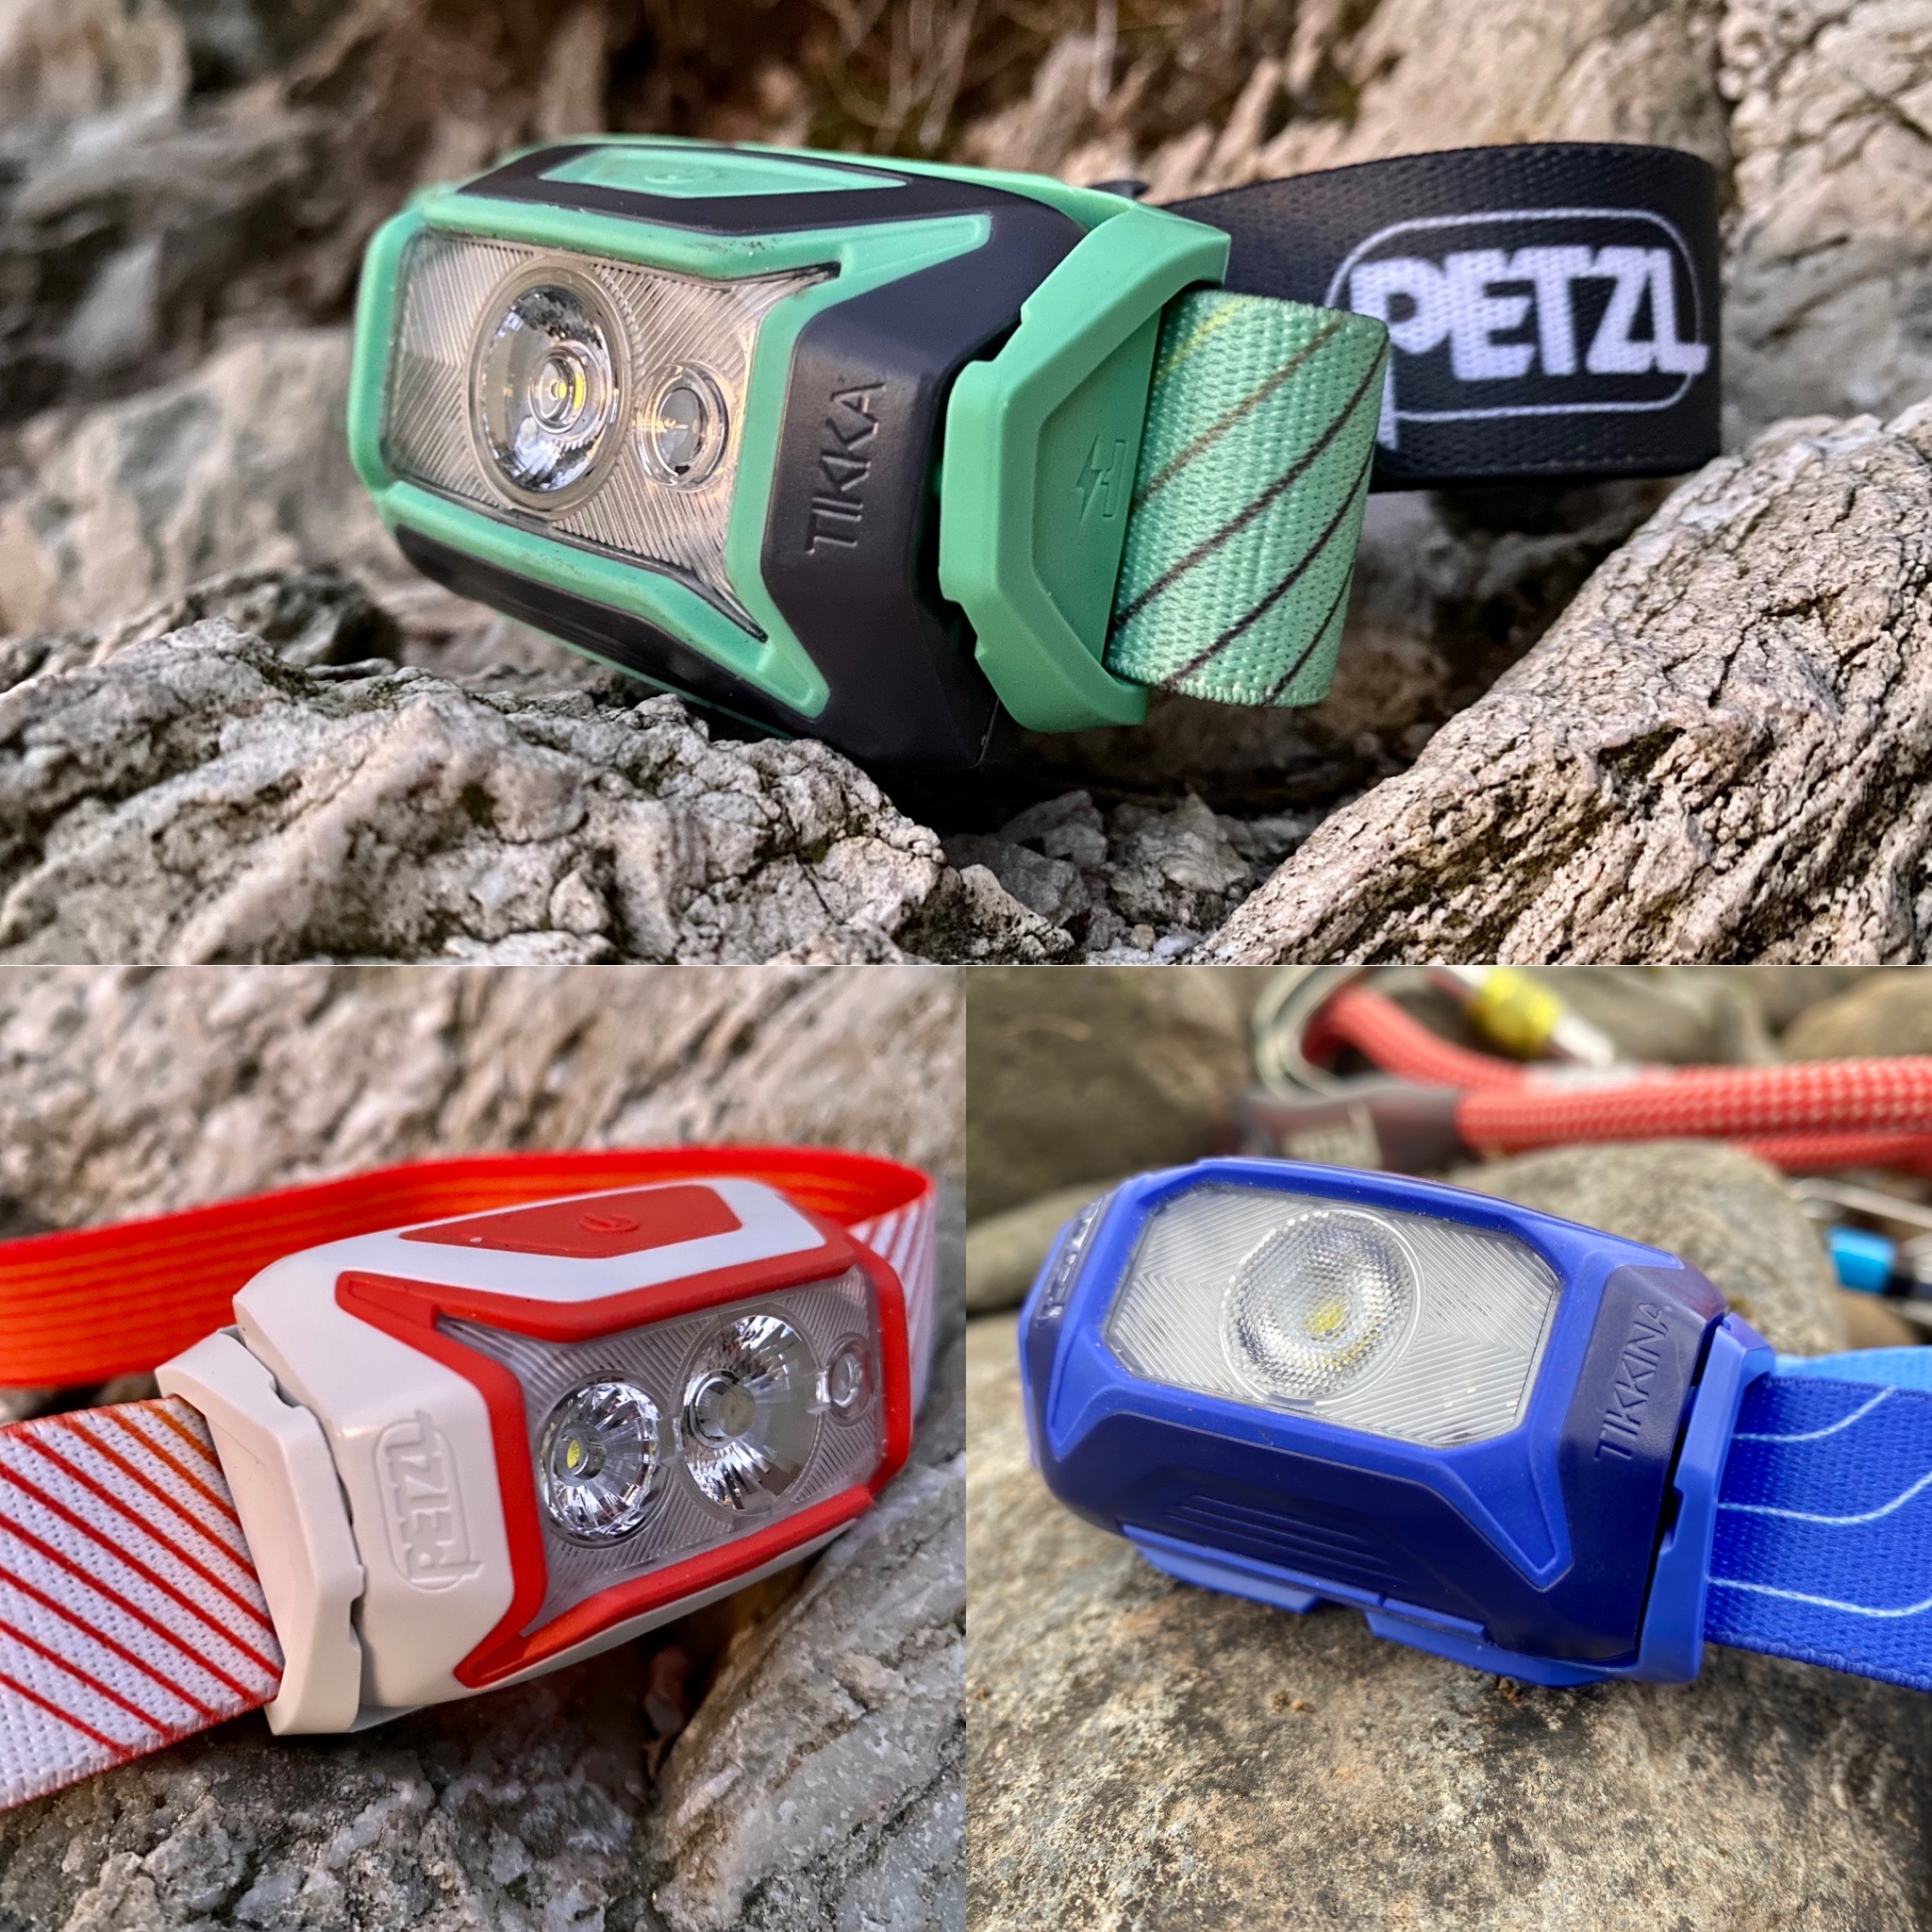 PETZL ACTIK CORE Headlamp - Powerful, Rechargeable 600 Lumen Light with Red  Lighting for Hiking, Climbing, and Camping